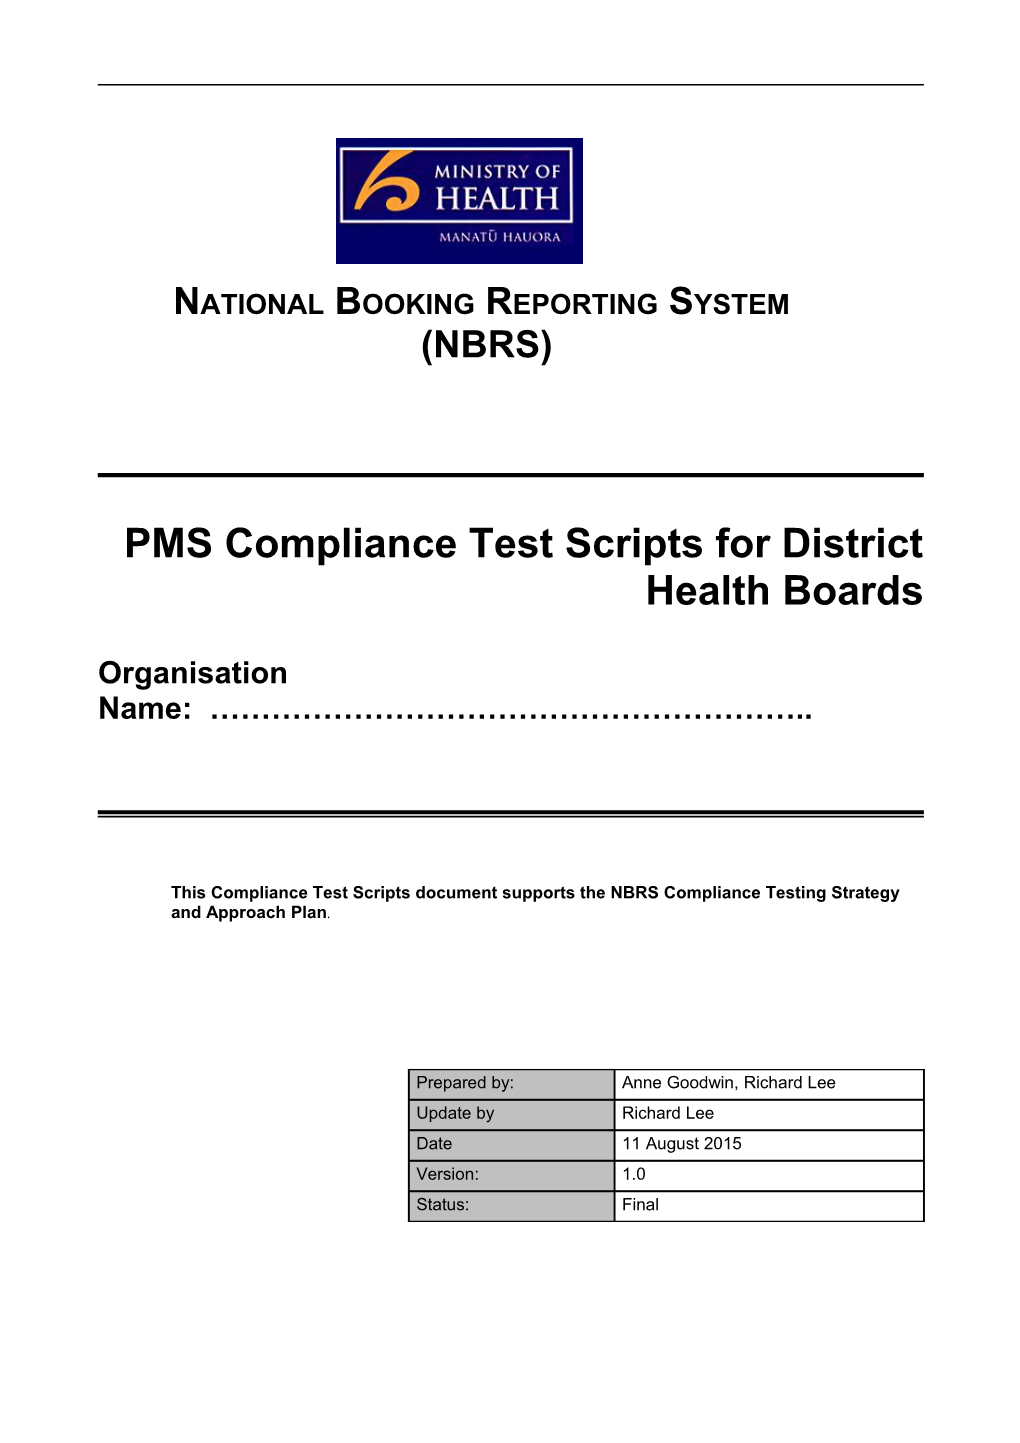 PMS Compliance Test Scripts for District Health Boards